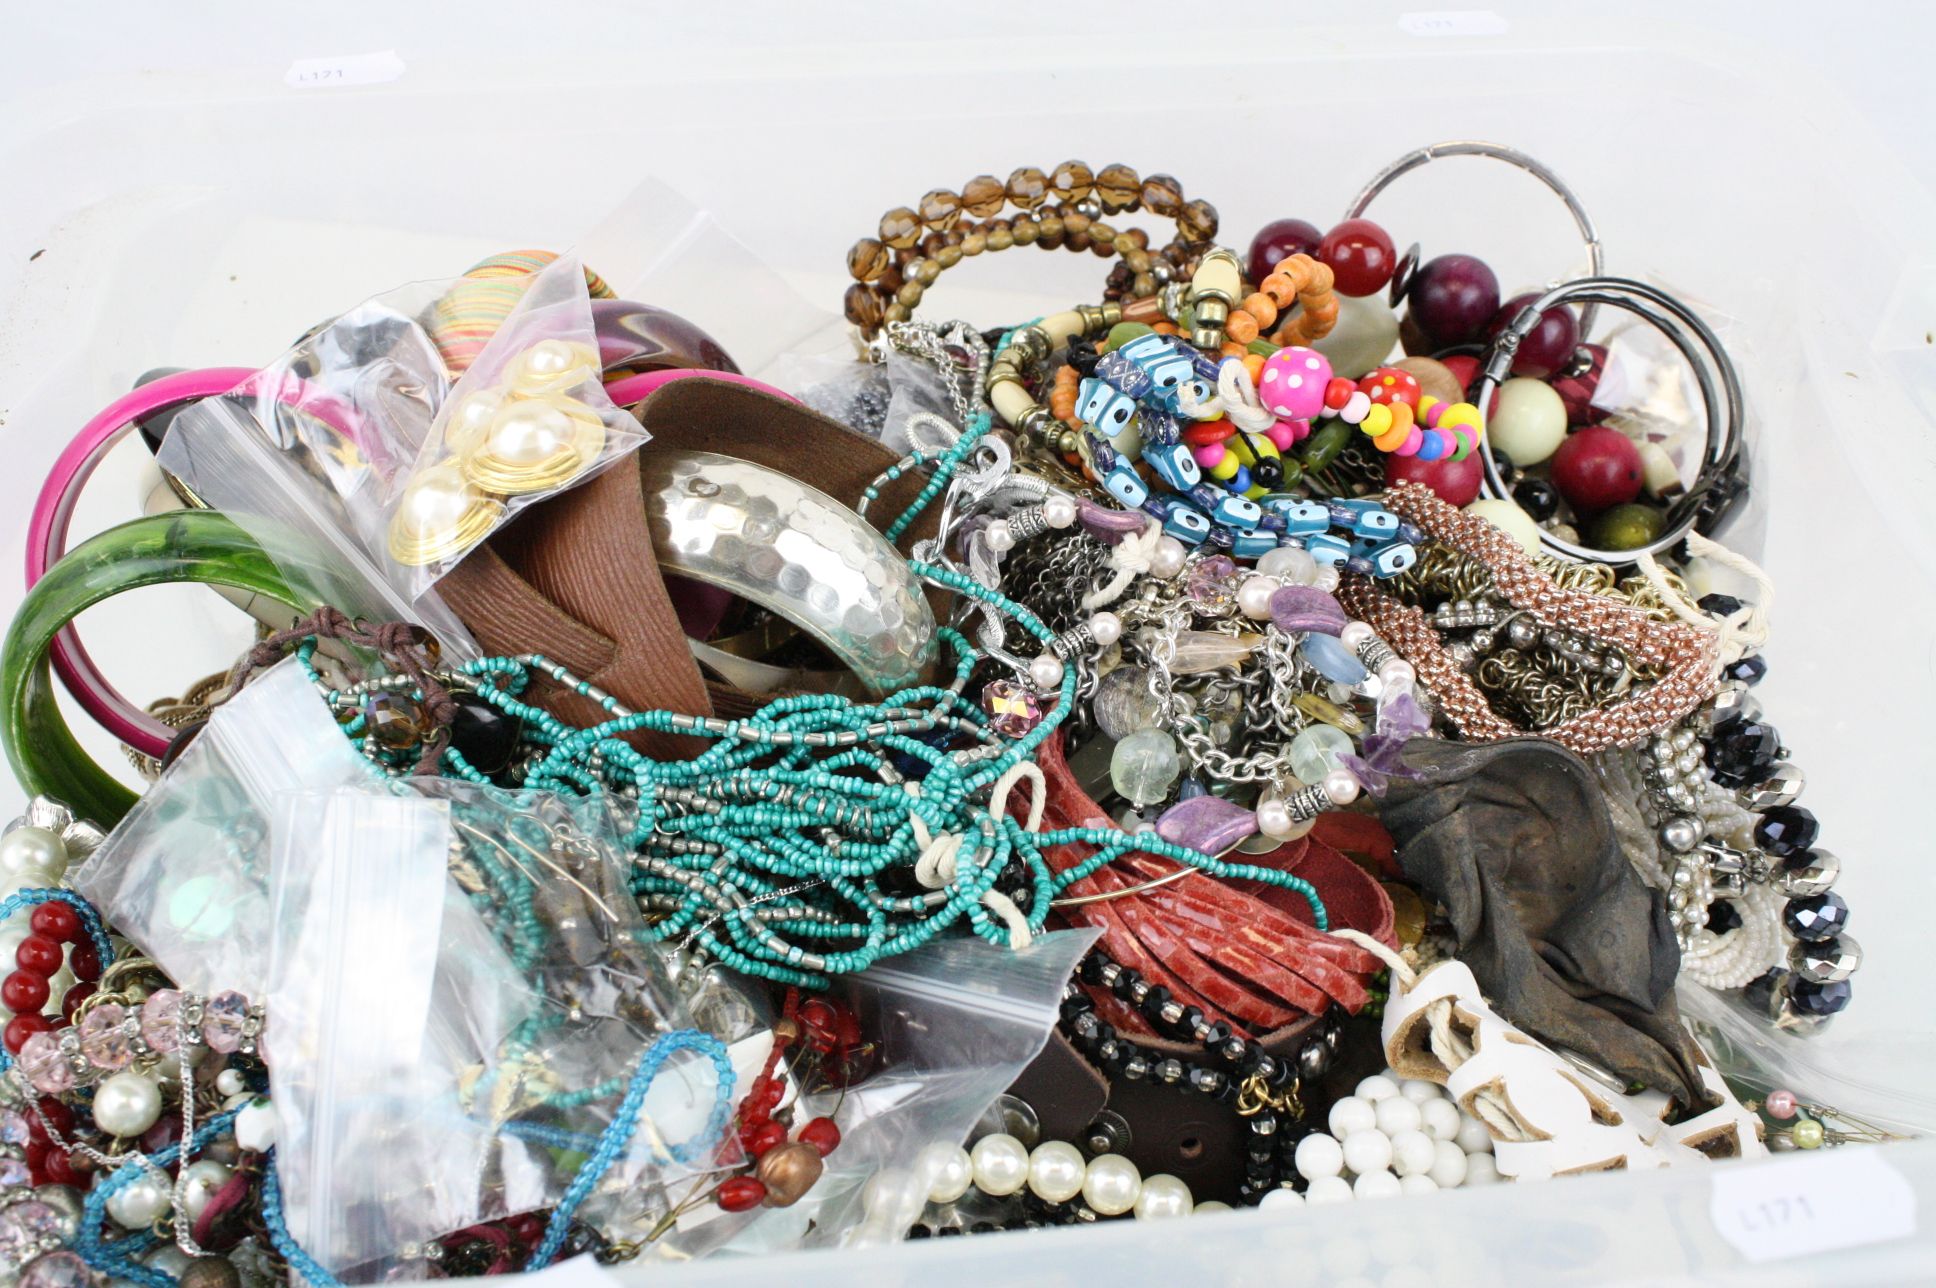 Large quantity of costume jewellery to include necklaces, bangles, beaded jewellery etc